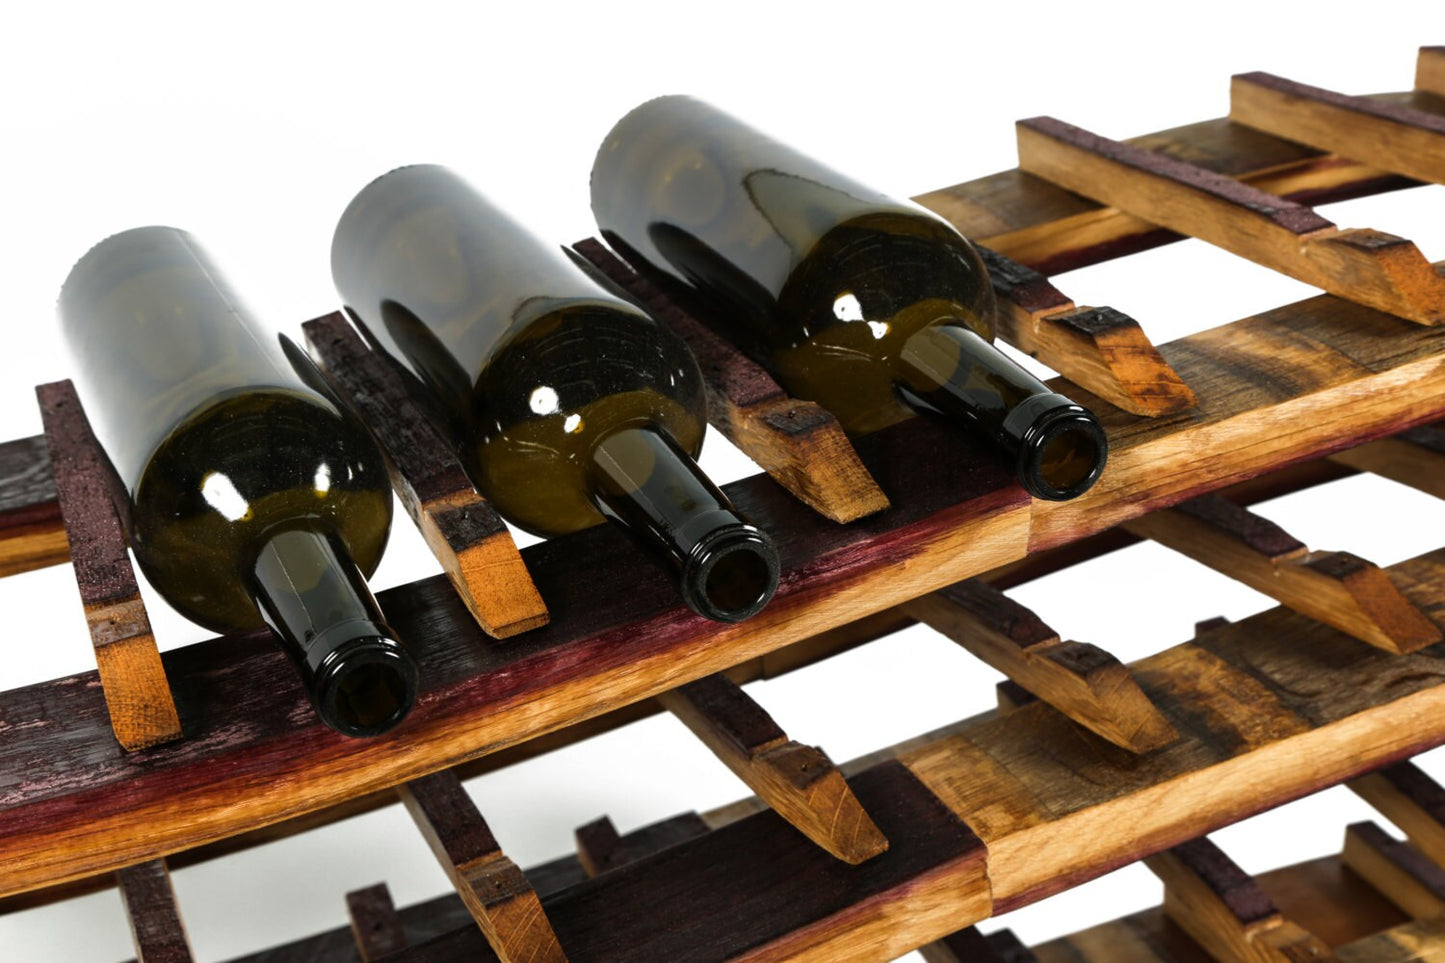 Large Wave Wine Rack - Antorini - Made from retired wine barrels. 100% Recycled!